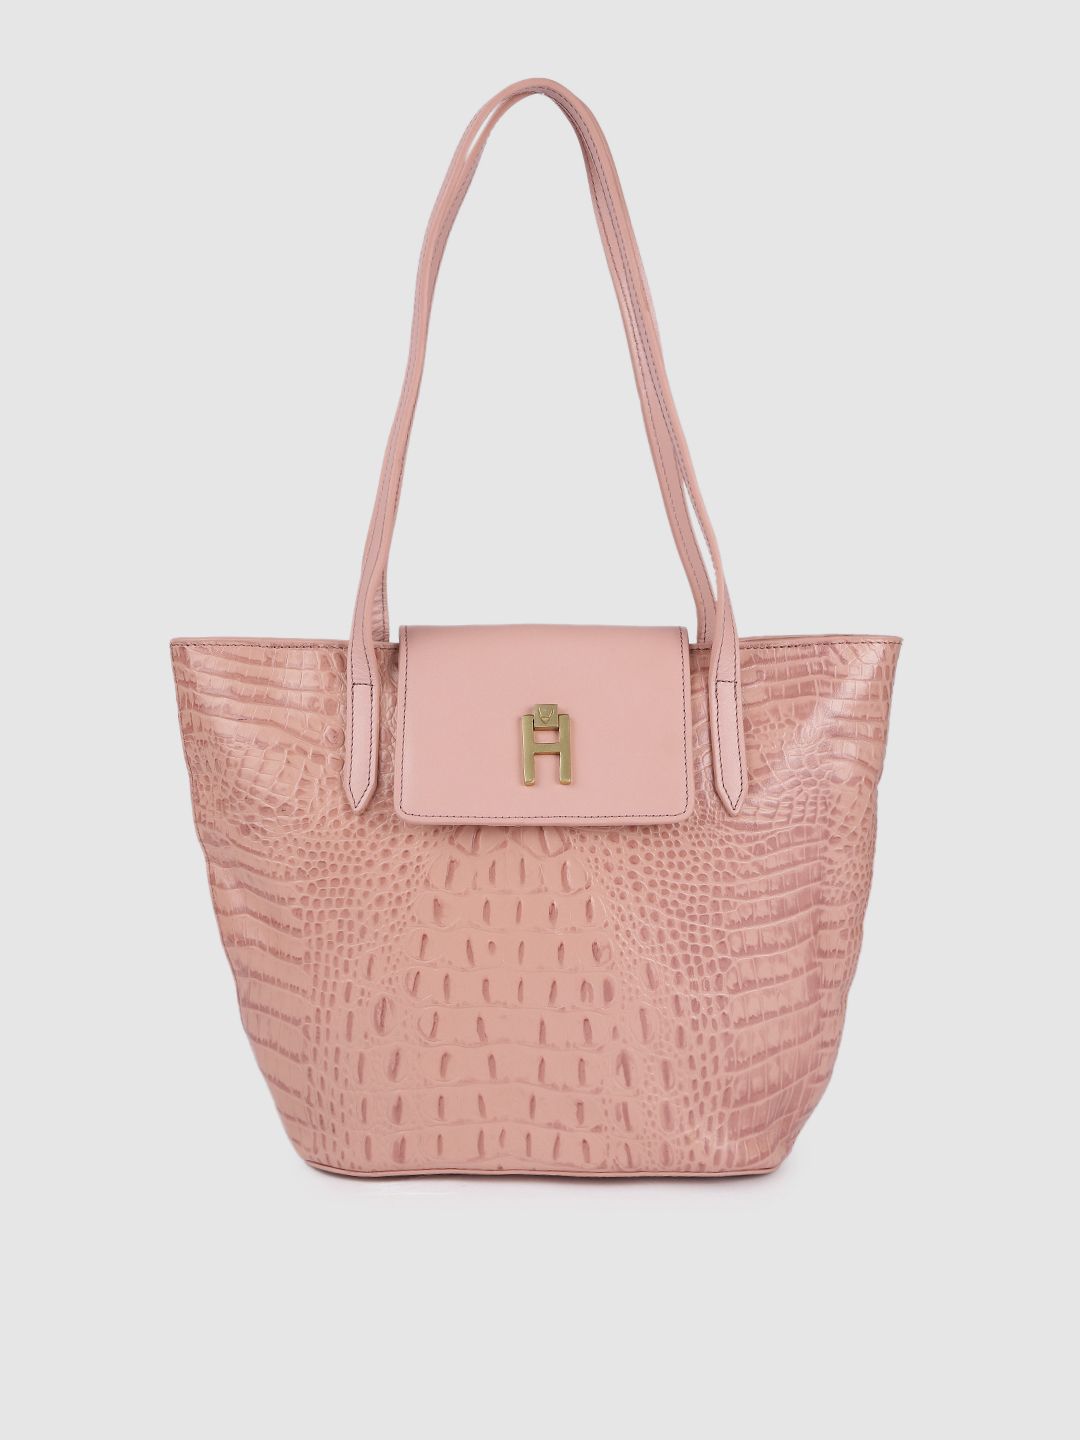 Hidesign Women Pink Animal Textured Leather Structured Shoulder Bag Price in India